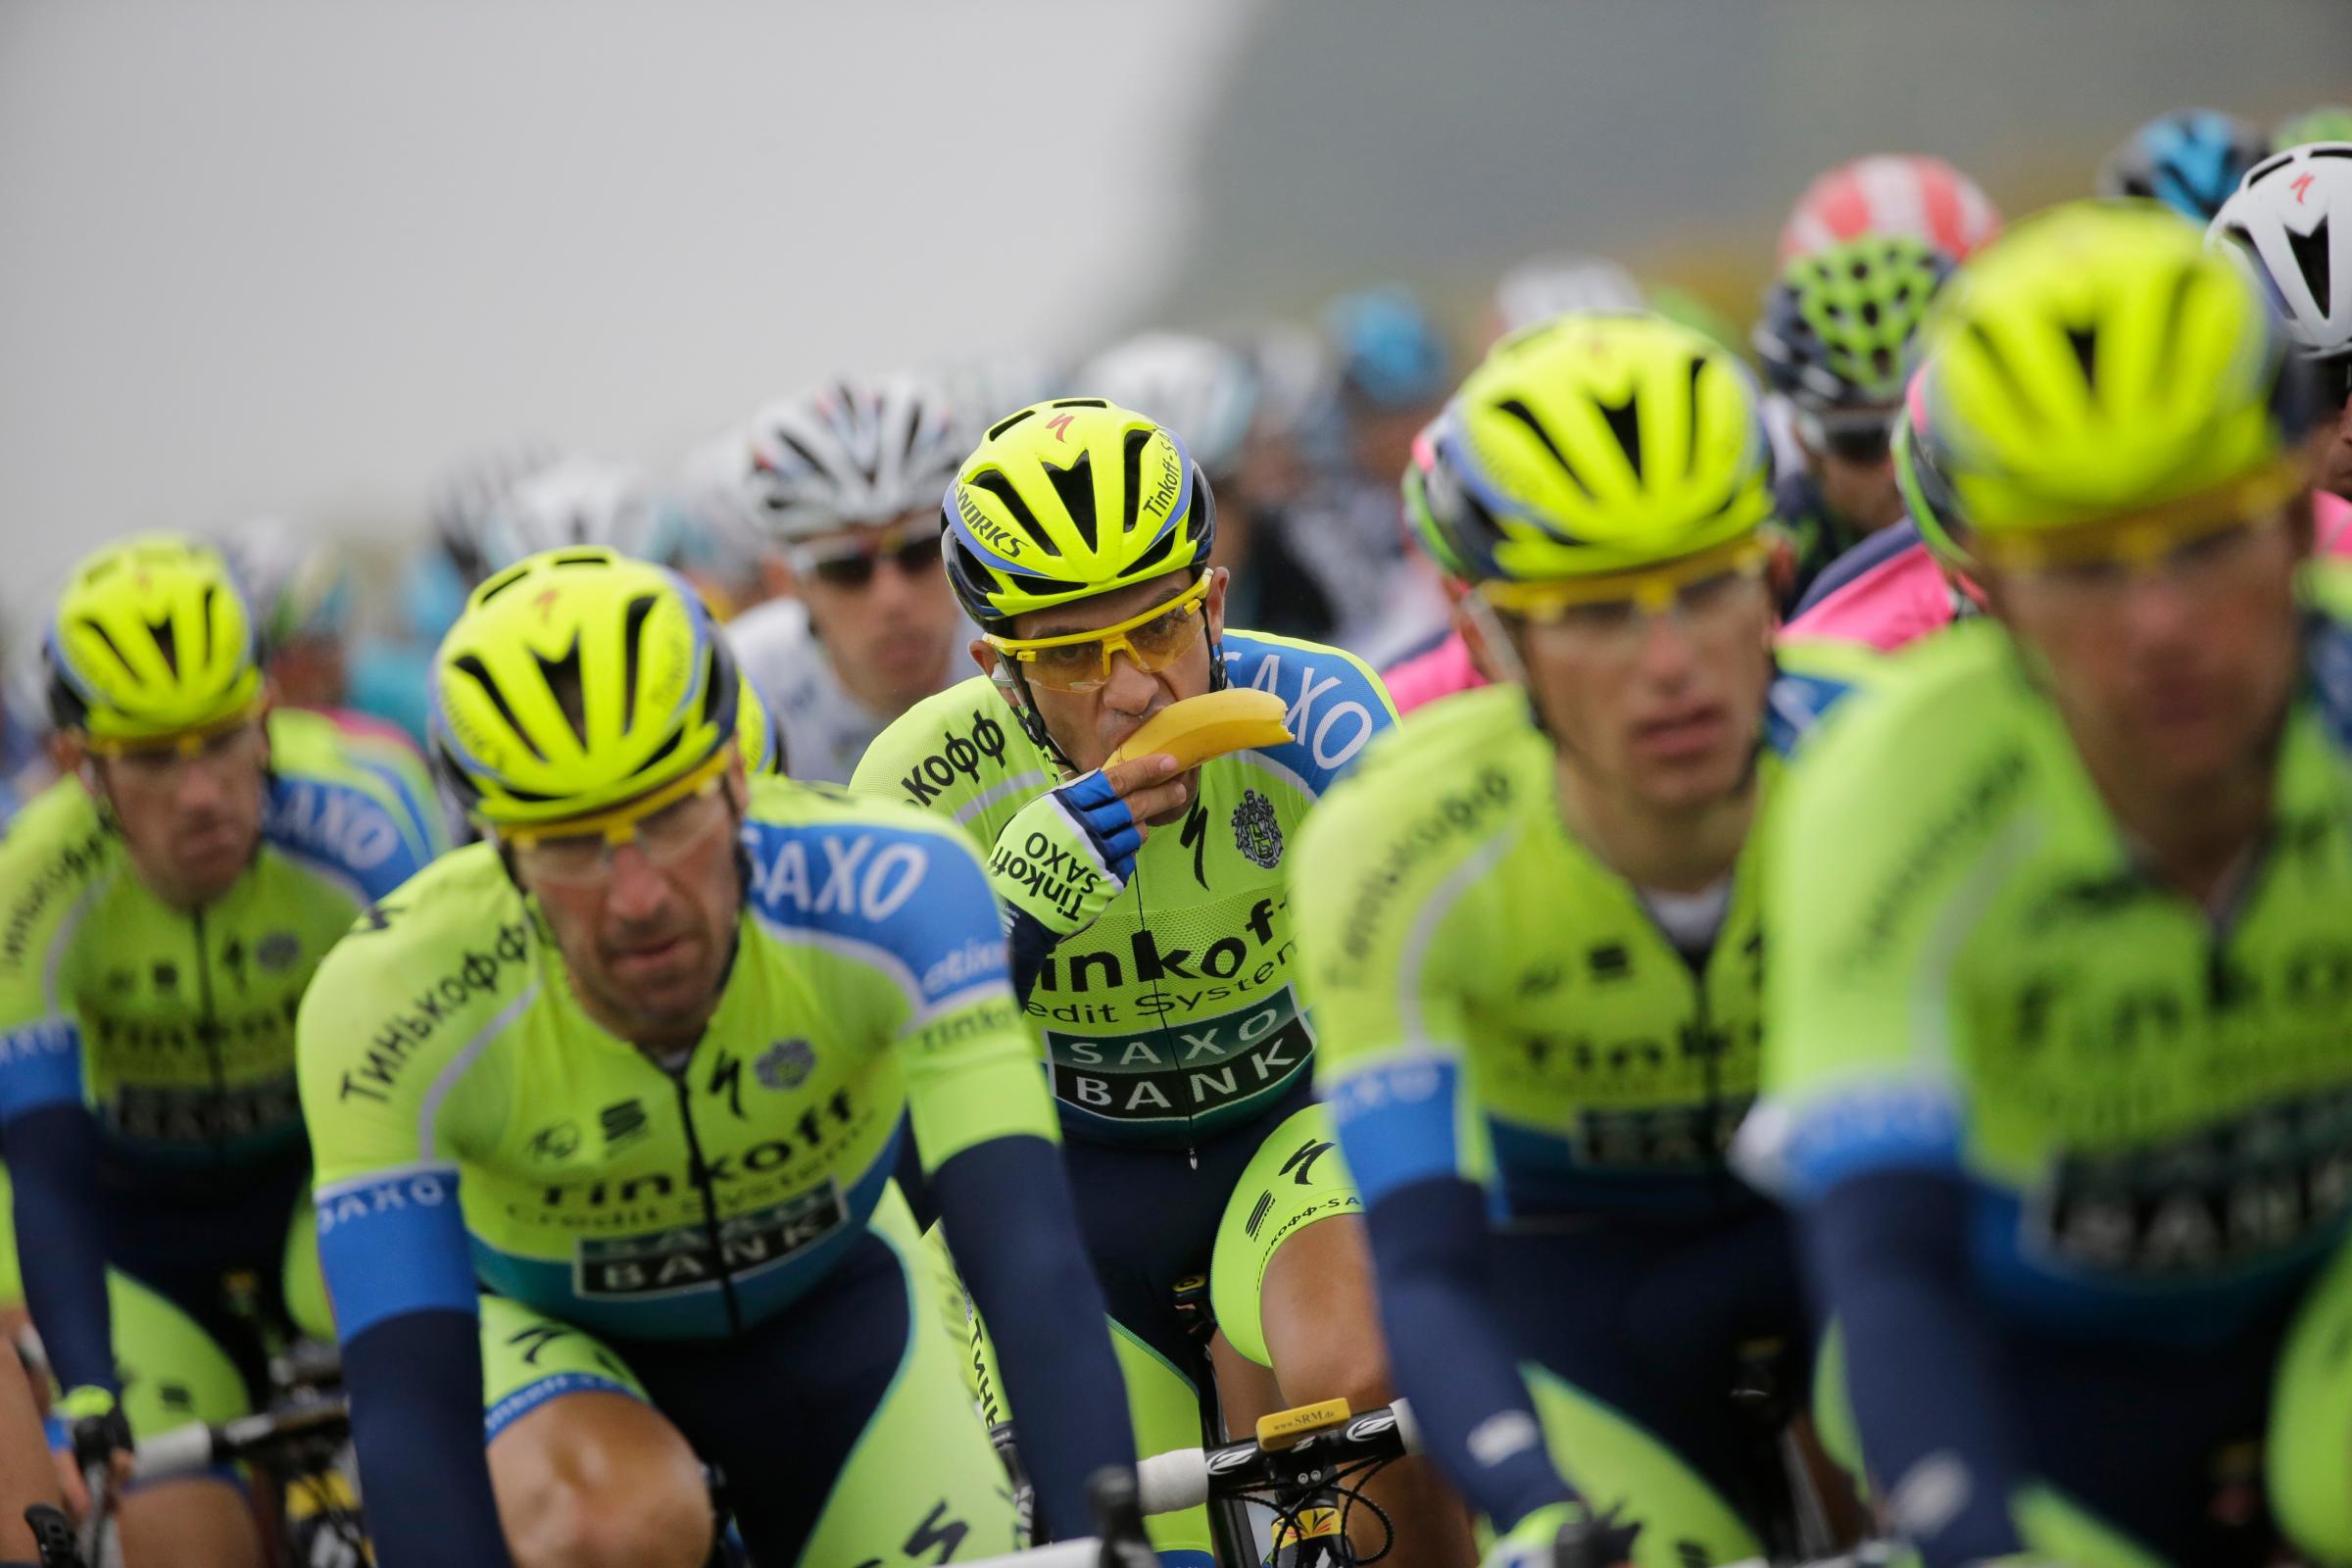 Spain's Alberto Contador eats a banana in as he rides in the pack during the sixth stage of the Tour de France cycling race over 194 kilometers (120.5 miles) with start in Arras and finish in Reims, France on July 10, 2014.